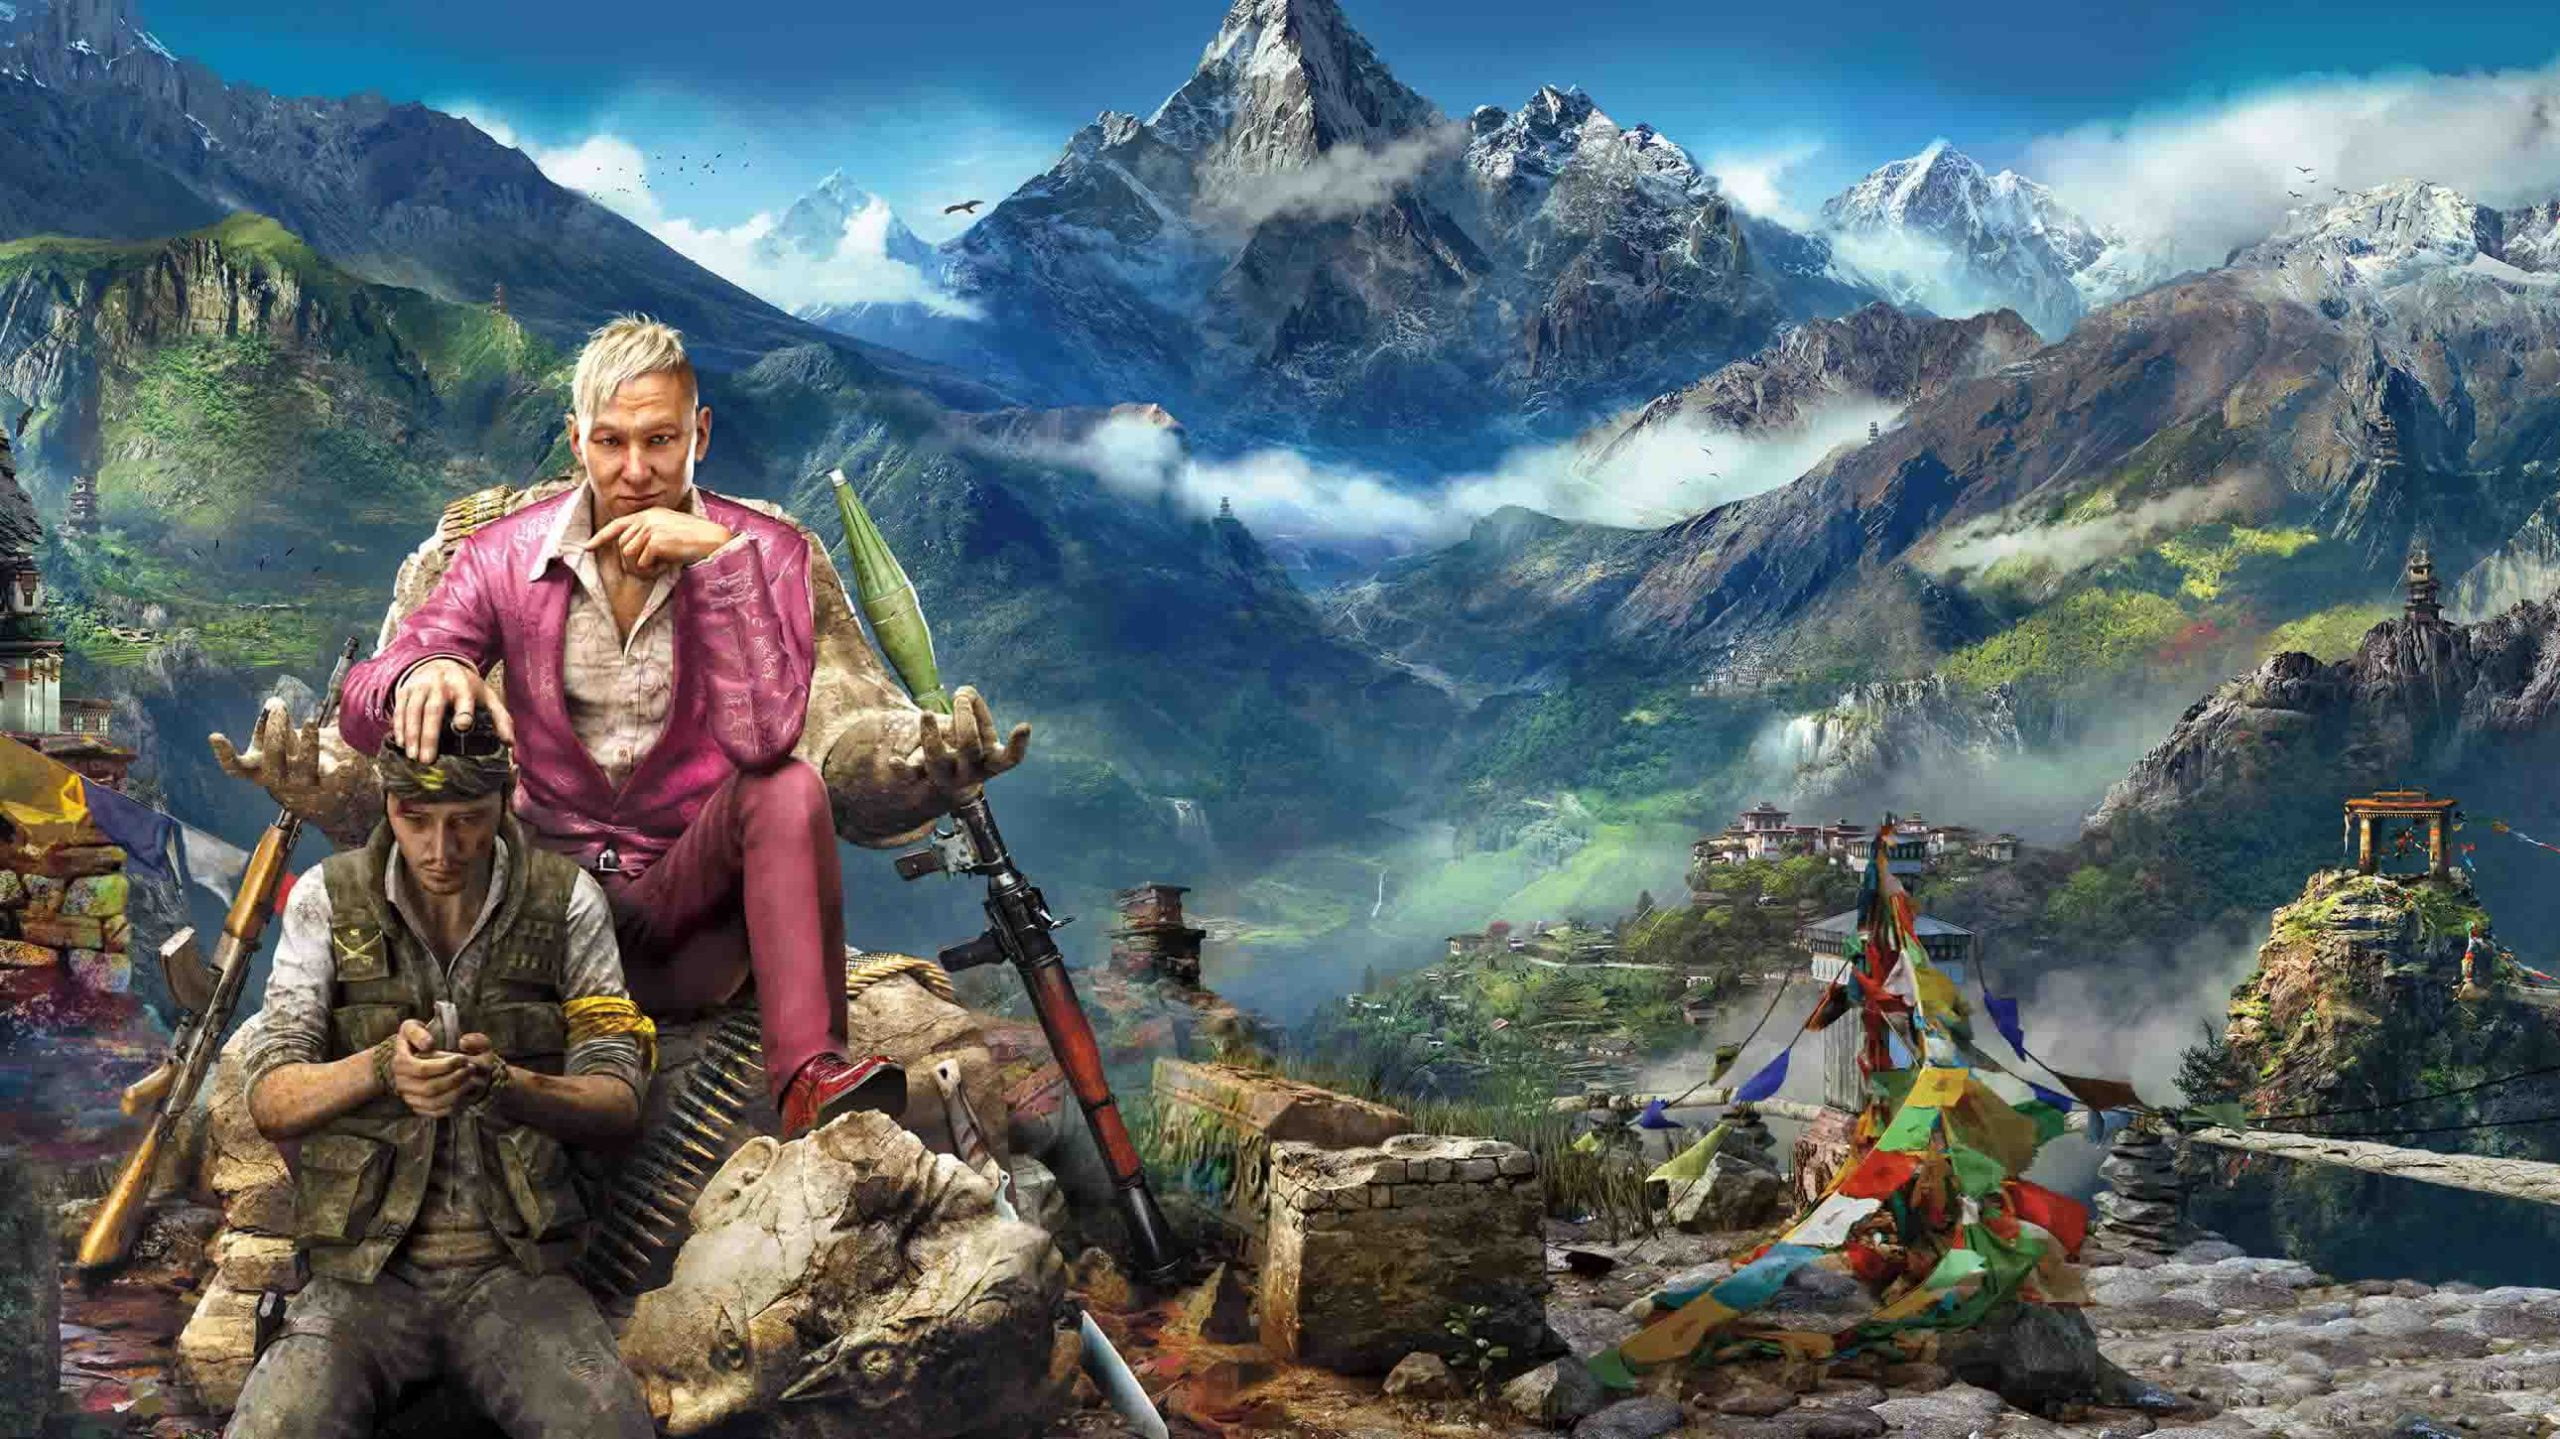 FAR CRY 4 System Requirements for PC Games minimum, recommended specifications for Windows, CPU, OS, Processor, RAM Memory, Storage, and GPU.